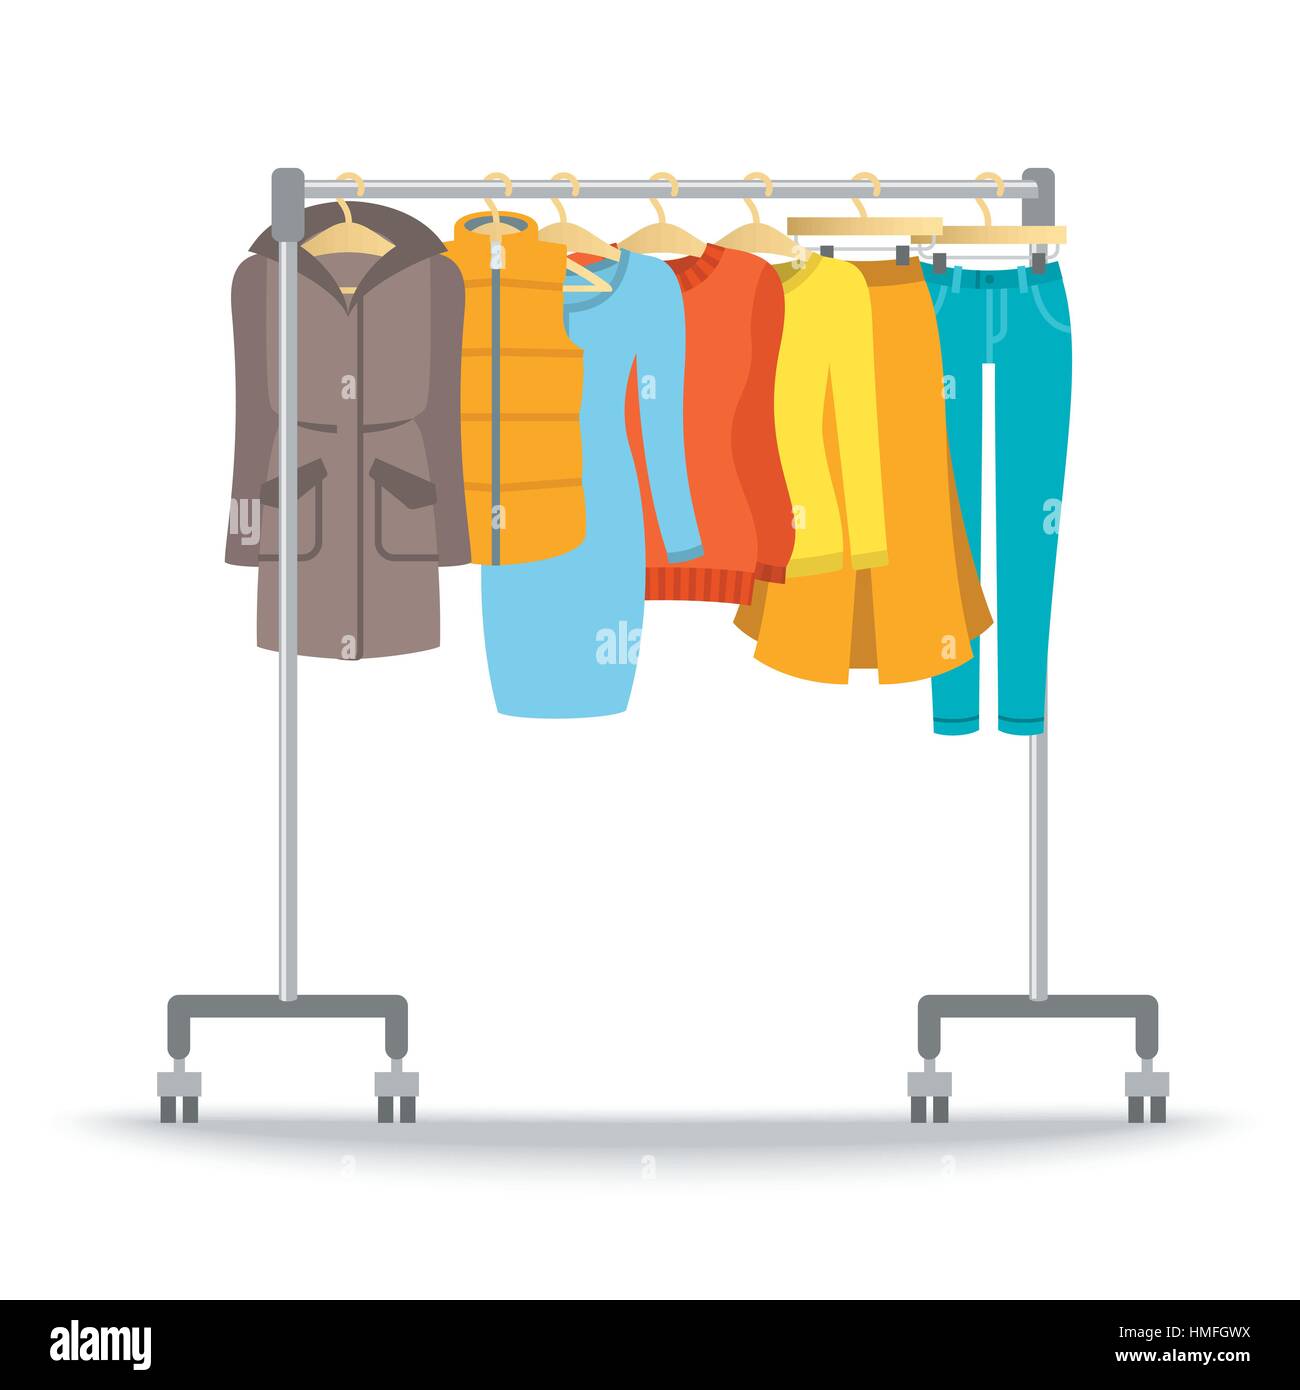 Hanger rack with warm women clothes winter collection. Flat style vector illustration. Female casual outfit elements hanging on rolling display stand. Stock Vector